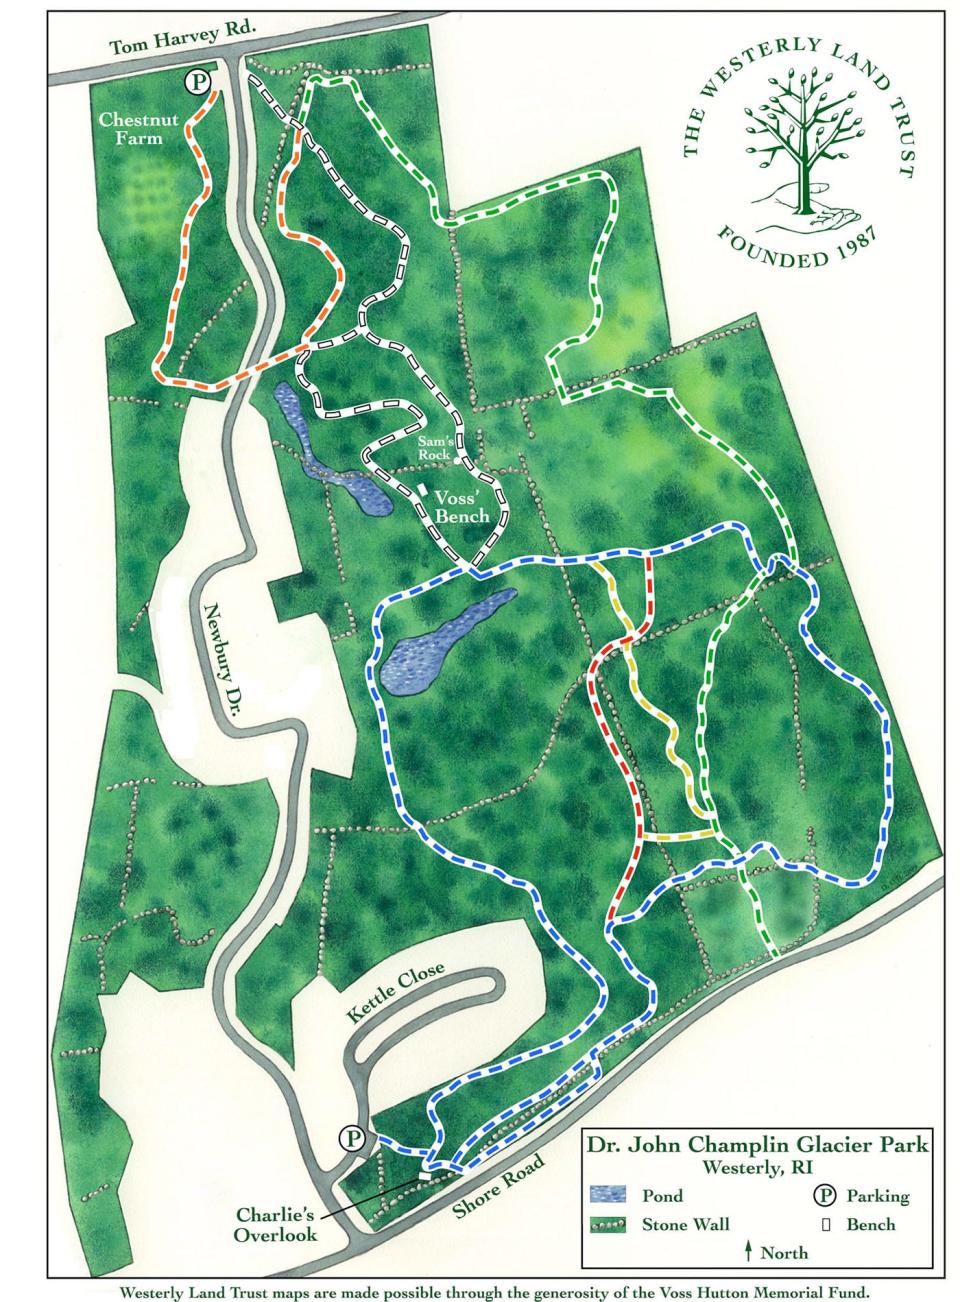 A trail map of Dr. John Champlin Glacier Park in Westerly